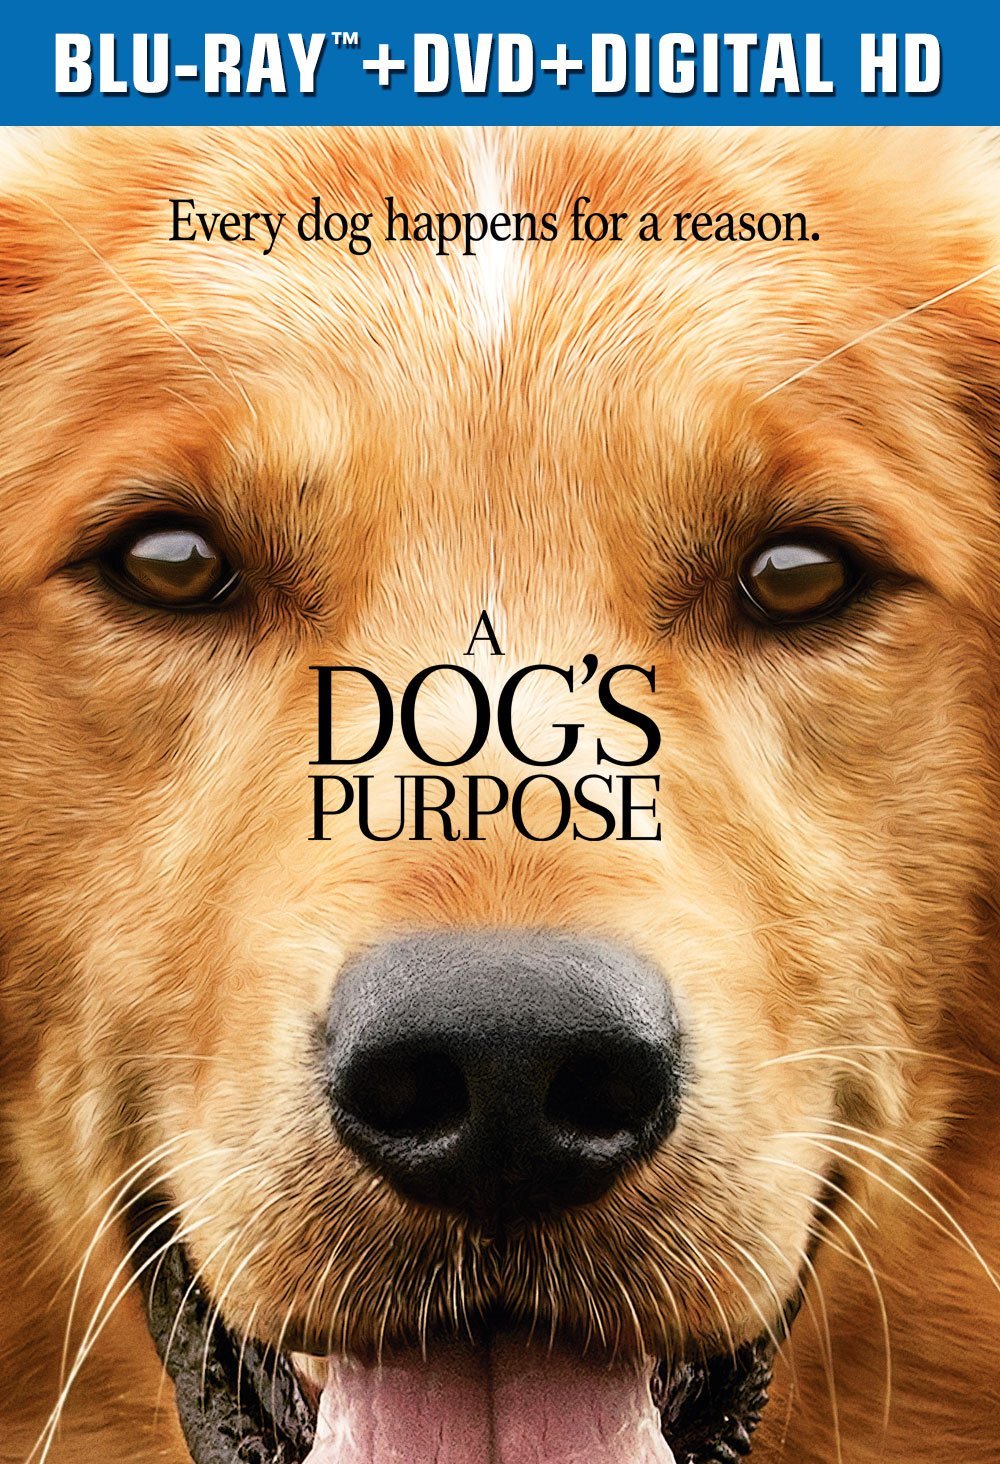 A Dog's Purpose Is An Adorable And Heartwarming Film!